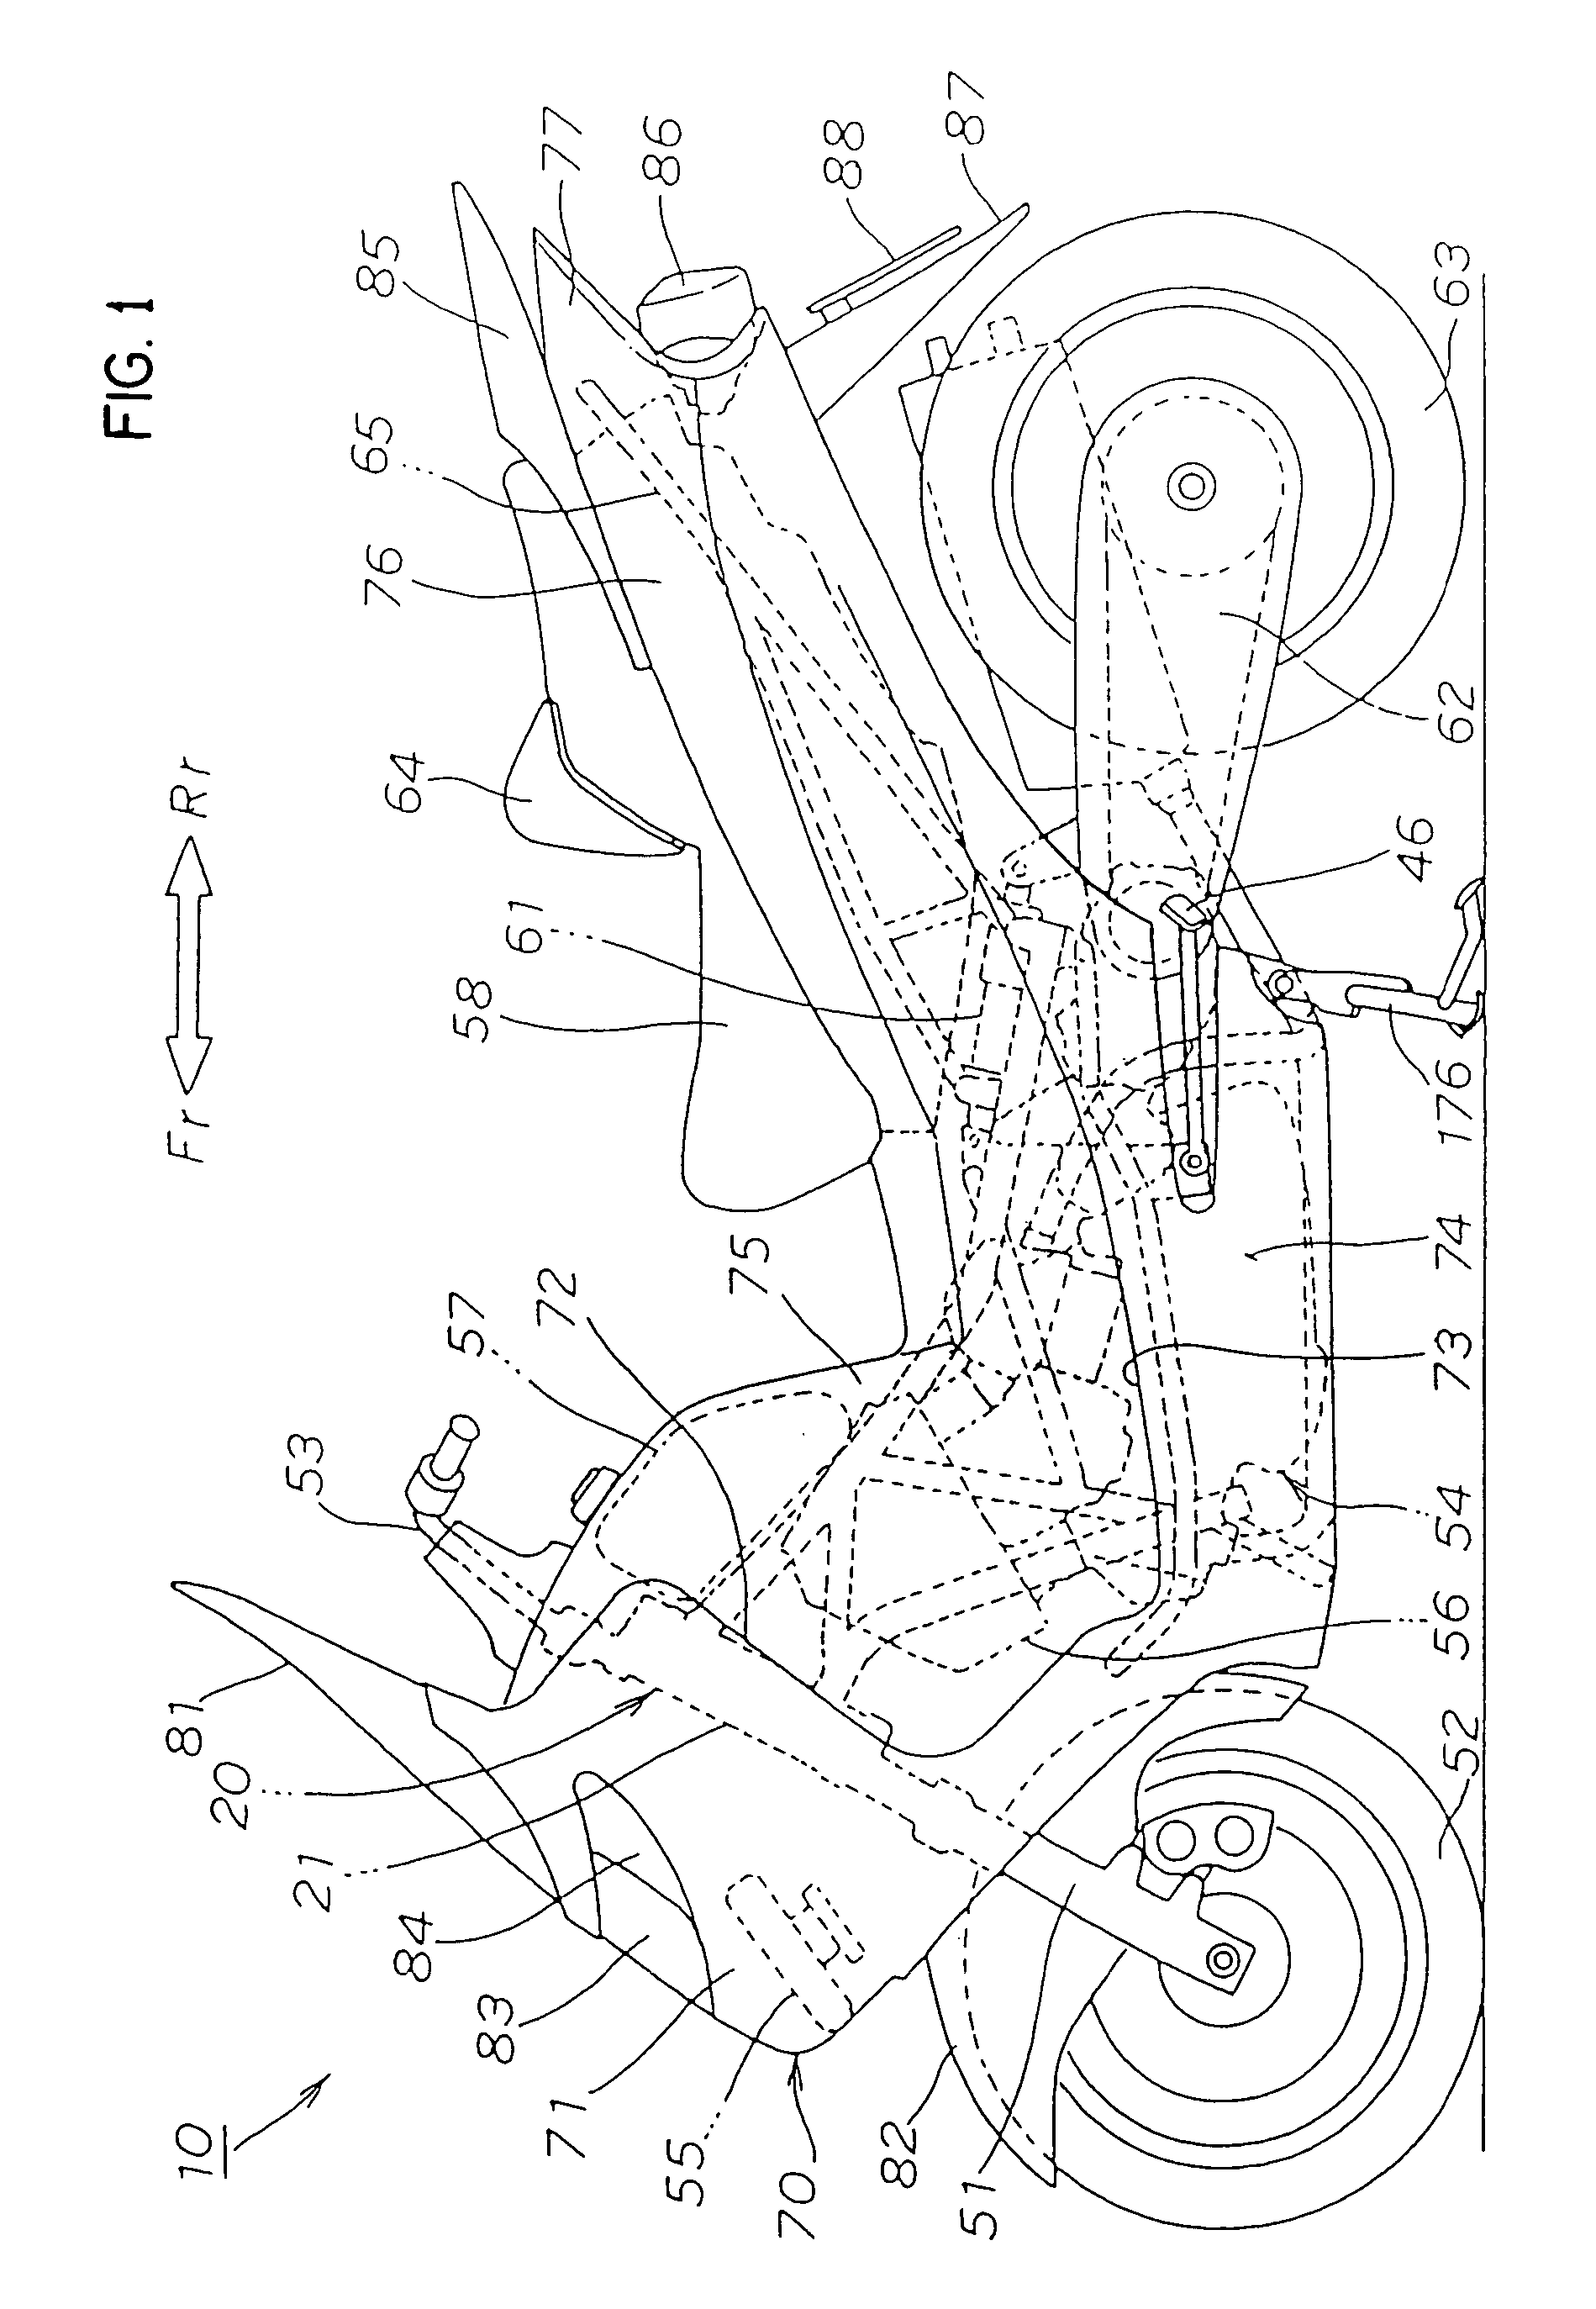 Air cleaner and air intake structures for low-deck vehicle